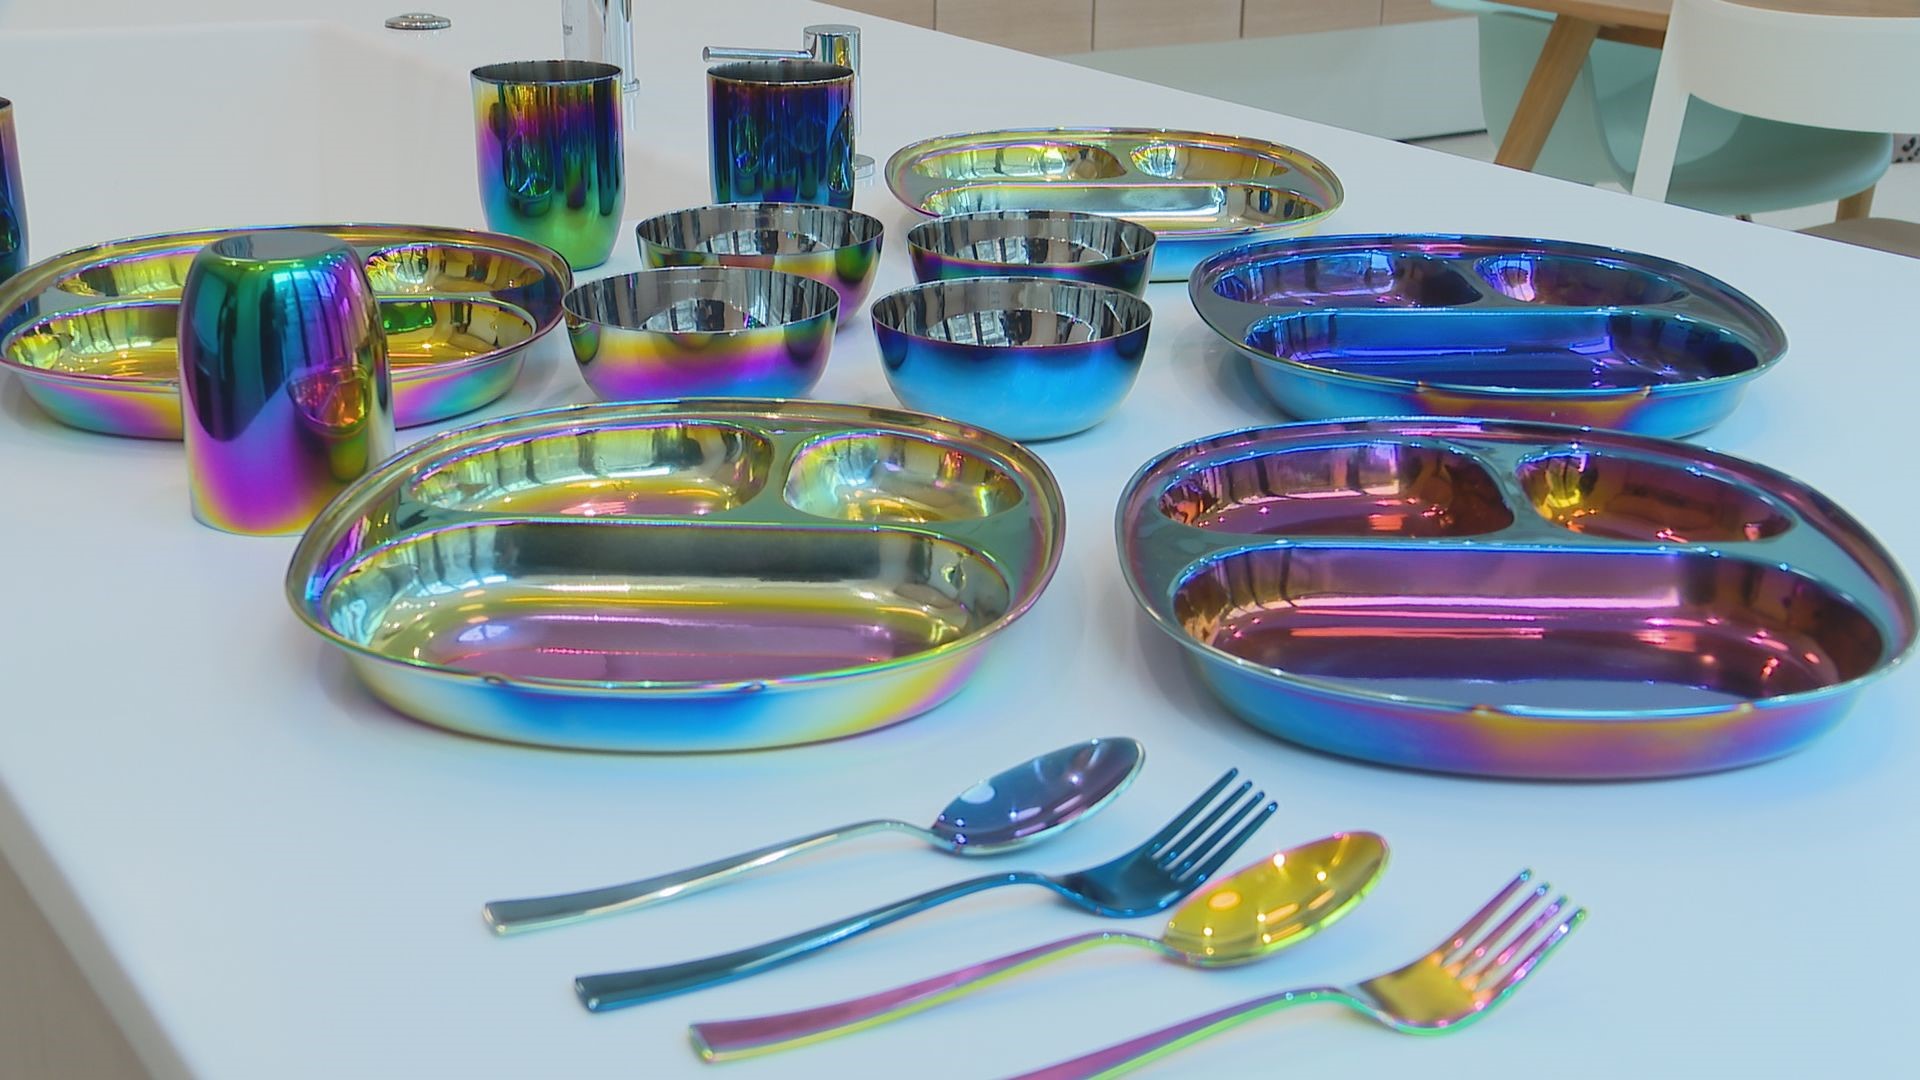 Manasa Mantravadi started her own line of silverware, plates, bowls and cups made of stainless steel called Ahimsa.